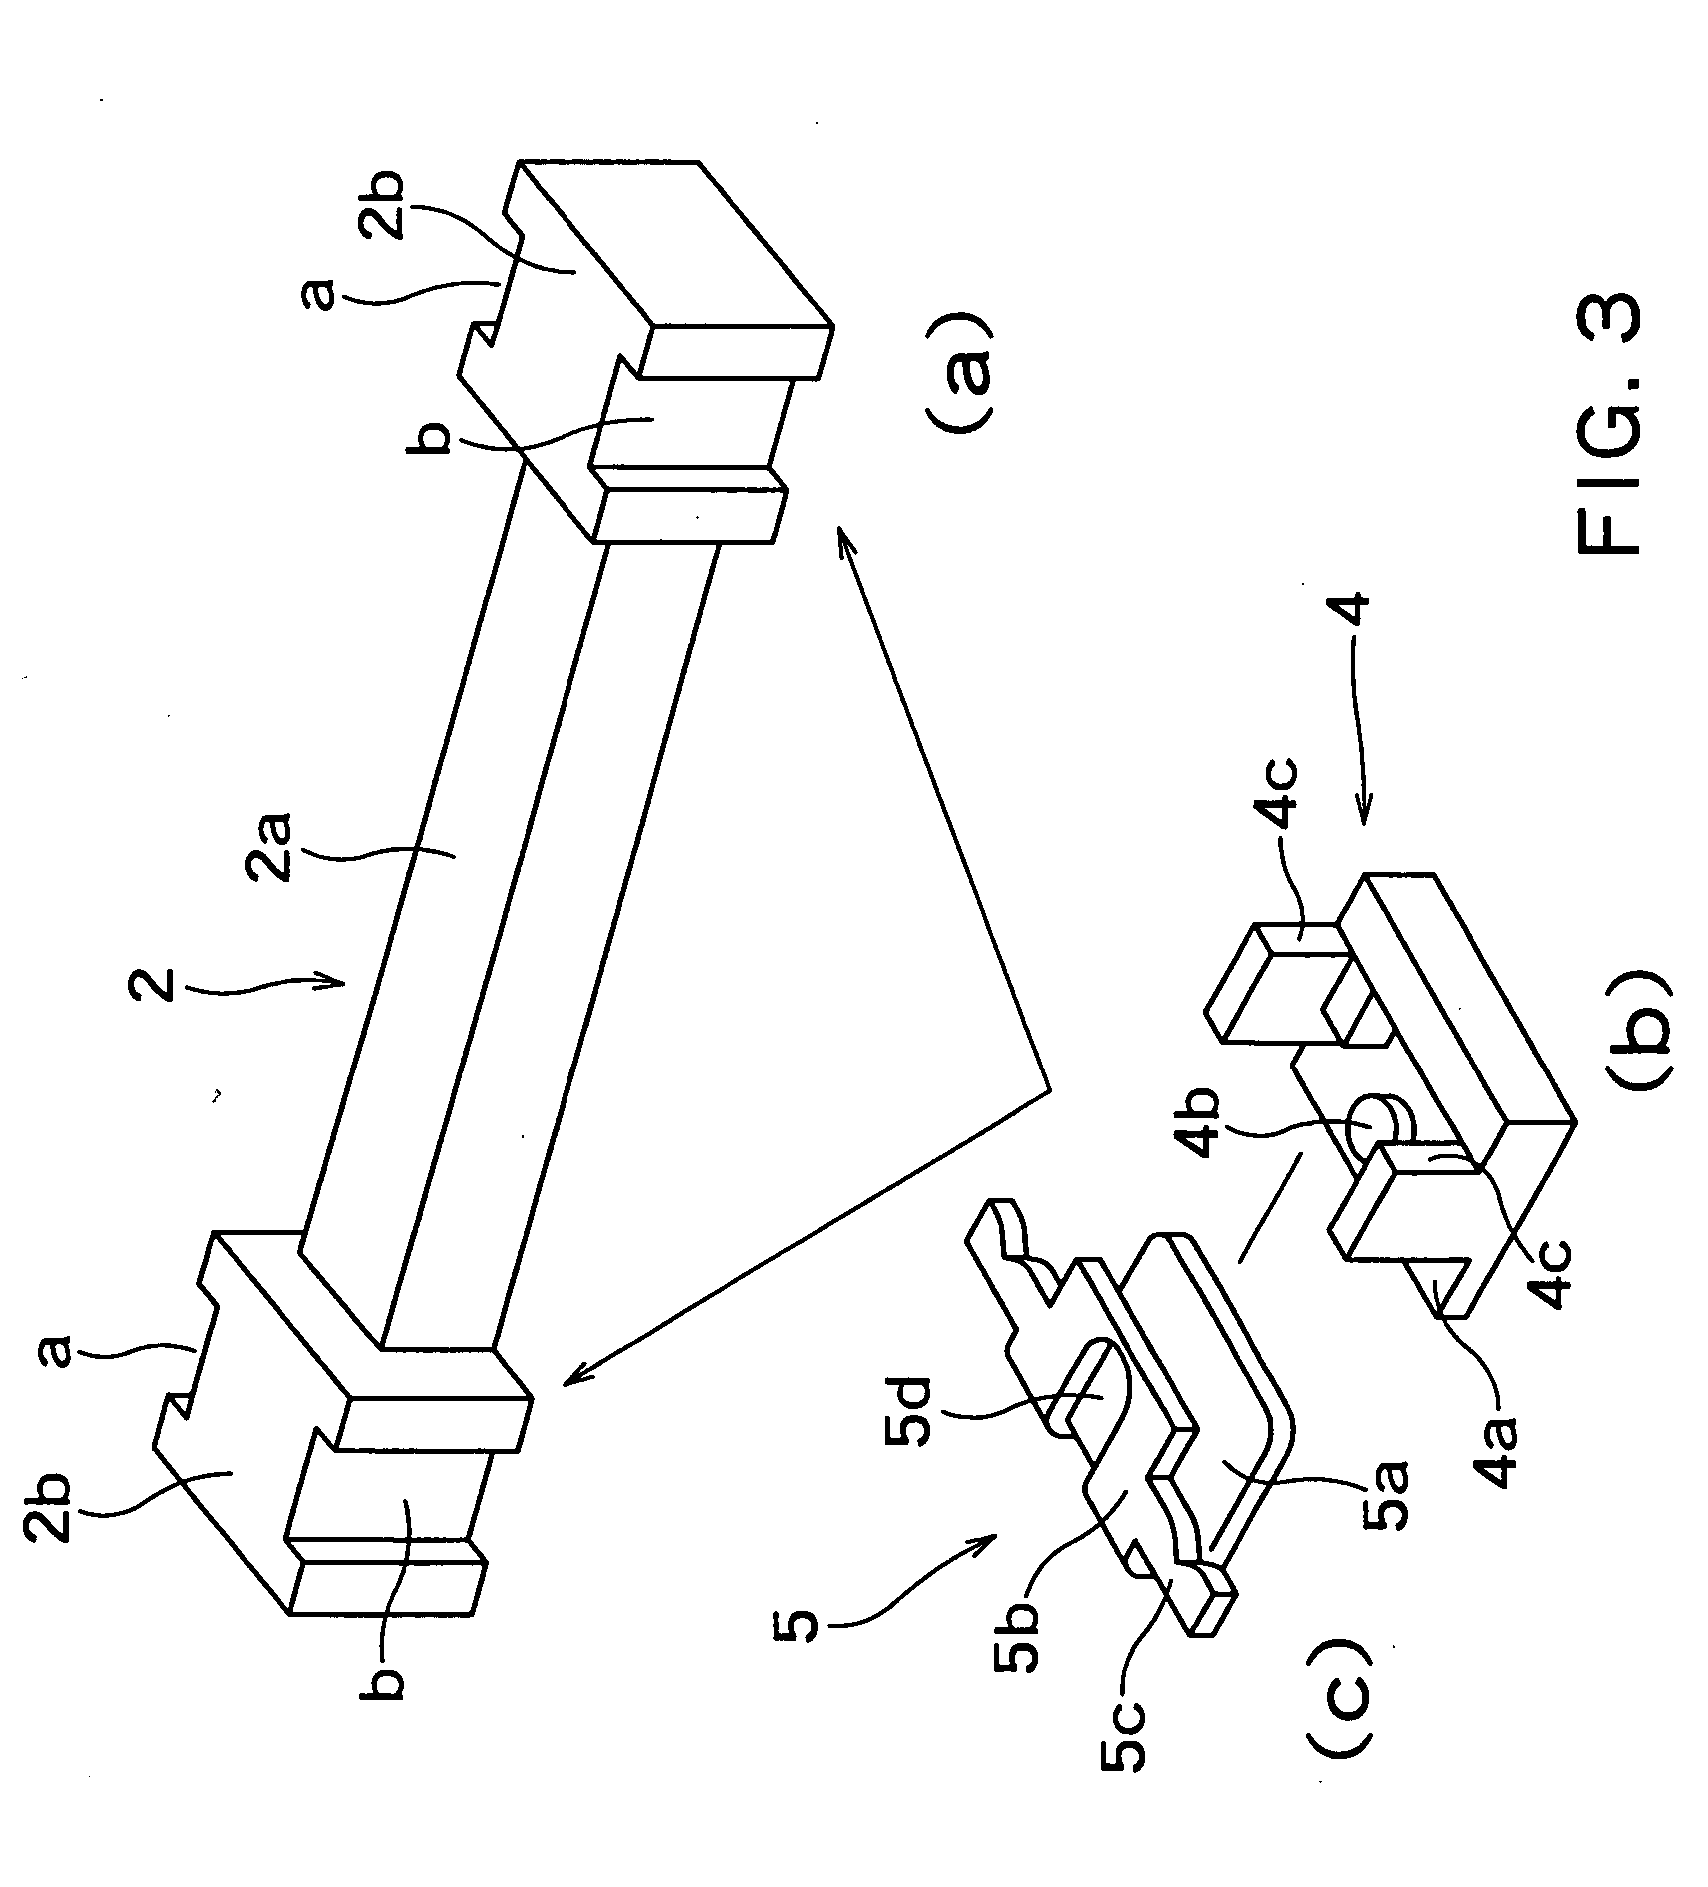 Miniature surface-mount electronic component and method for manufacturing the same